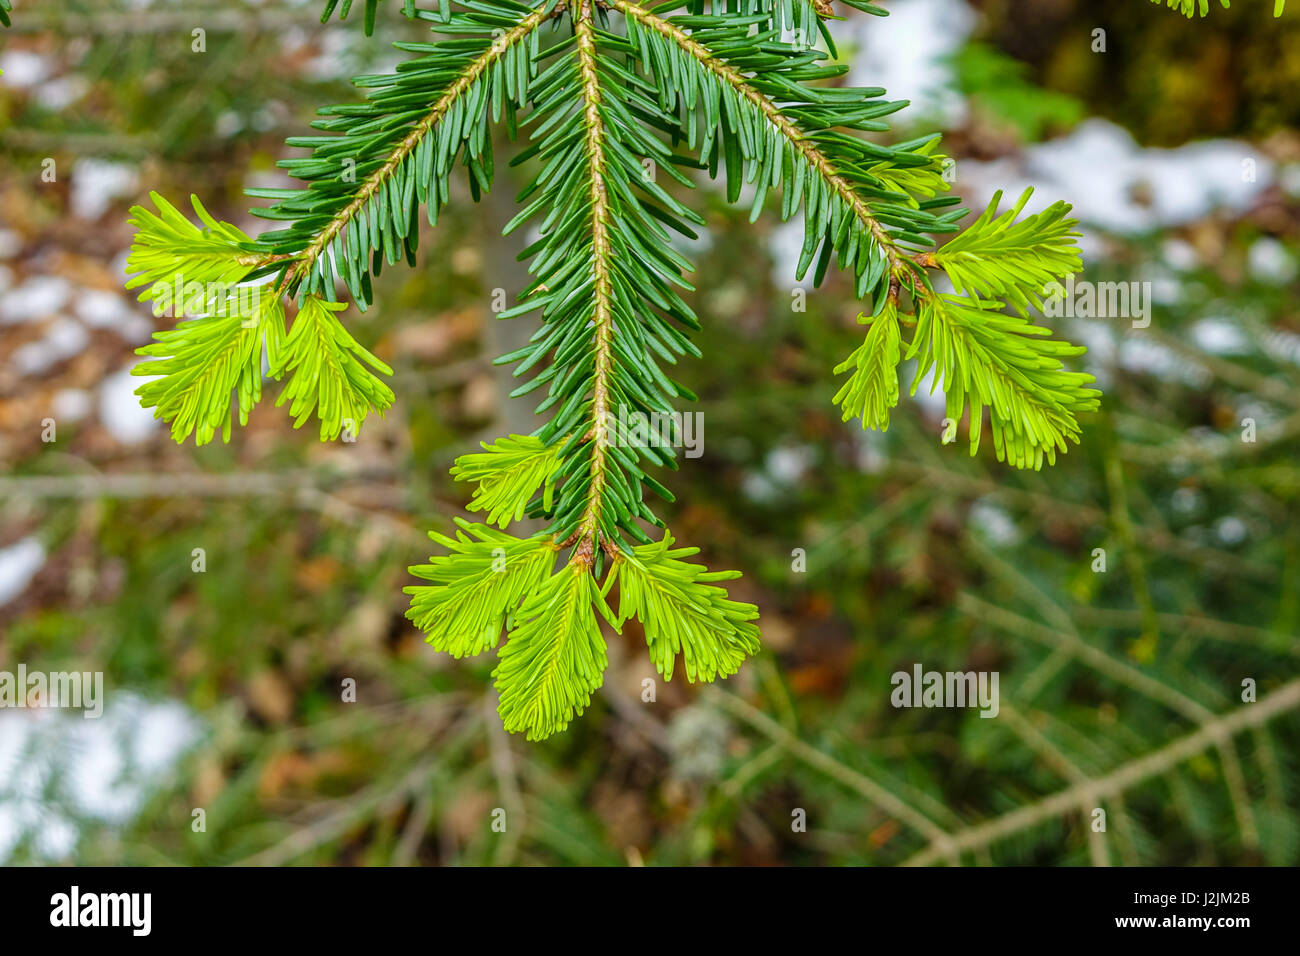 Fresh green growth on the tips of pine tree leaves with snow behind Stock Photo